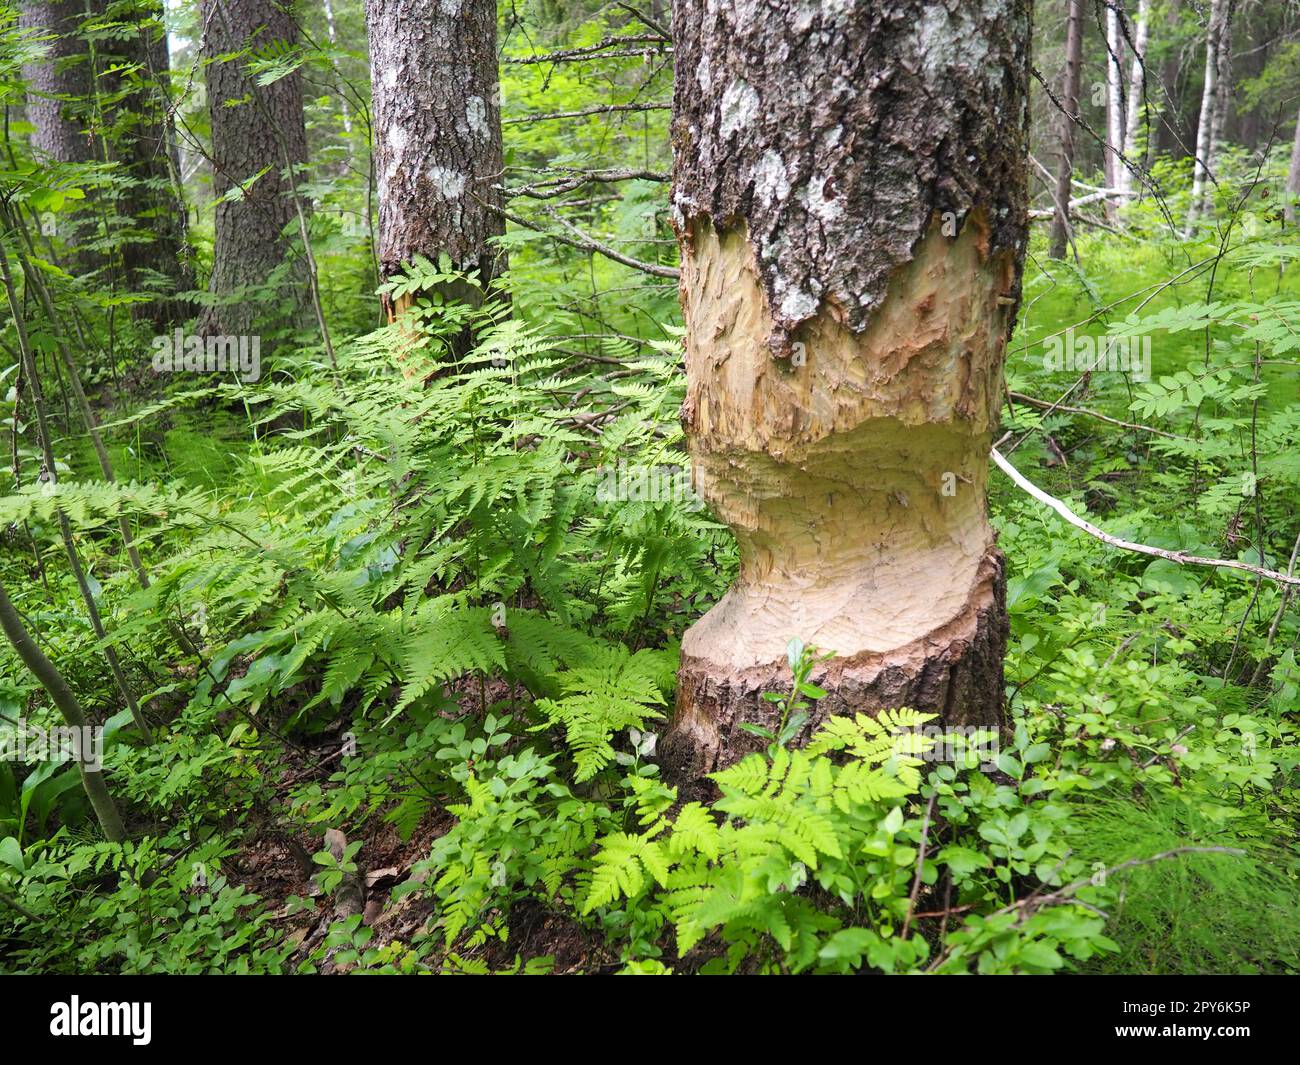 A tree gnawed by a beaver. Damaged bark and wood. The work of a beaver for the construction of a dam. Taiga, Karelia, Russia. Hunting and fishing. Life activity of European forest animals. Stock Photo